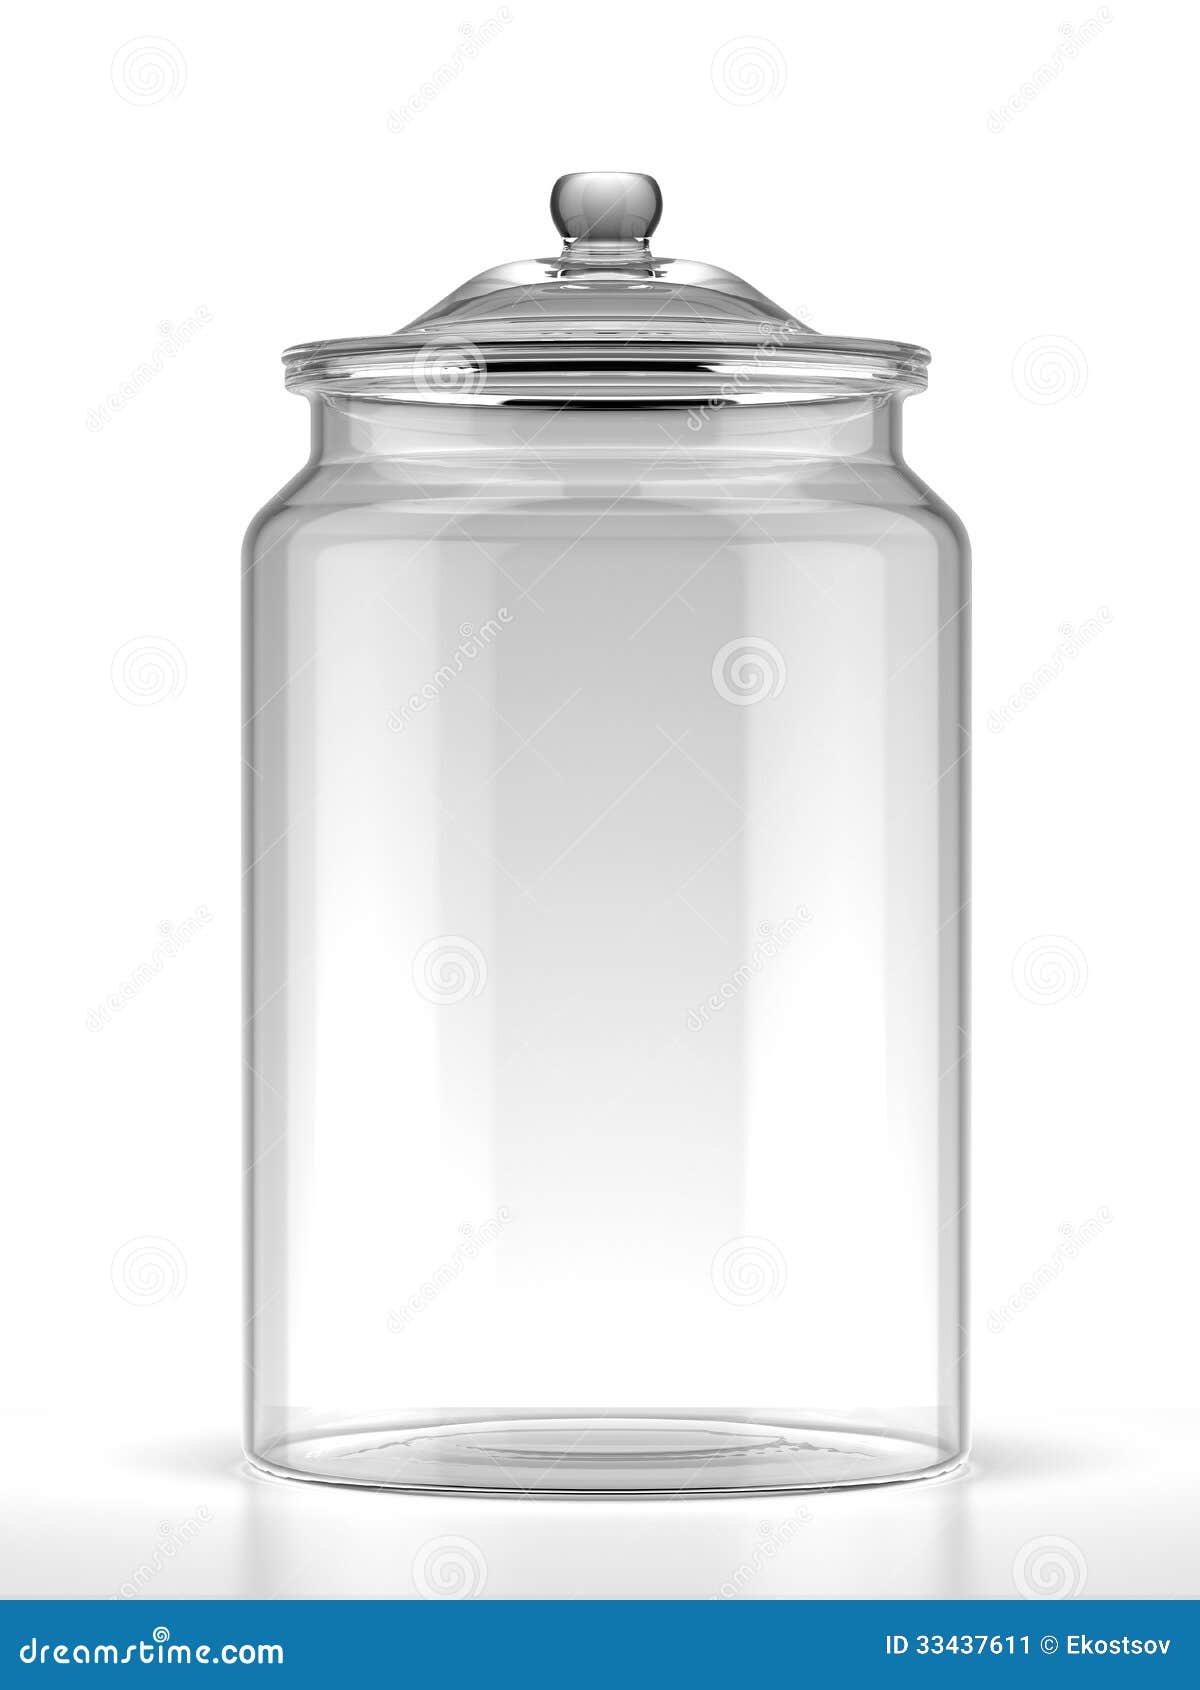 Glass jar isolated on a white background